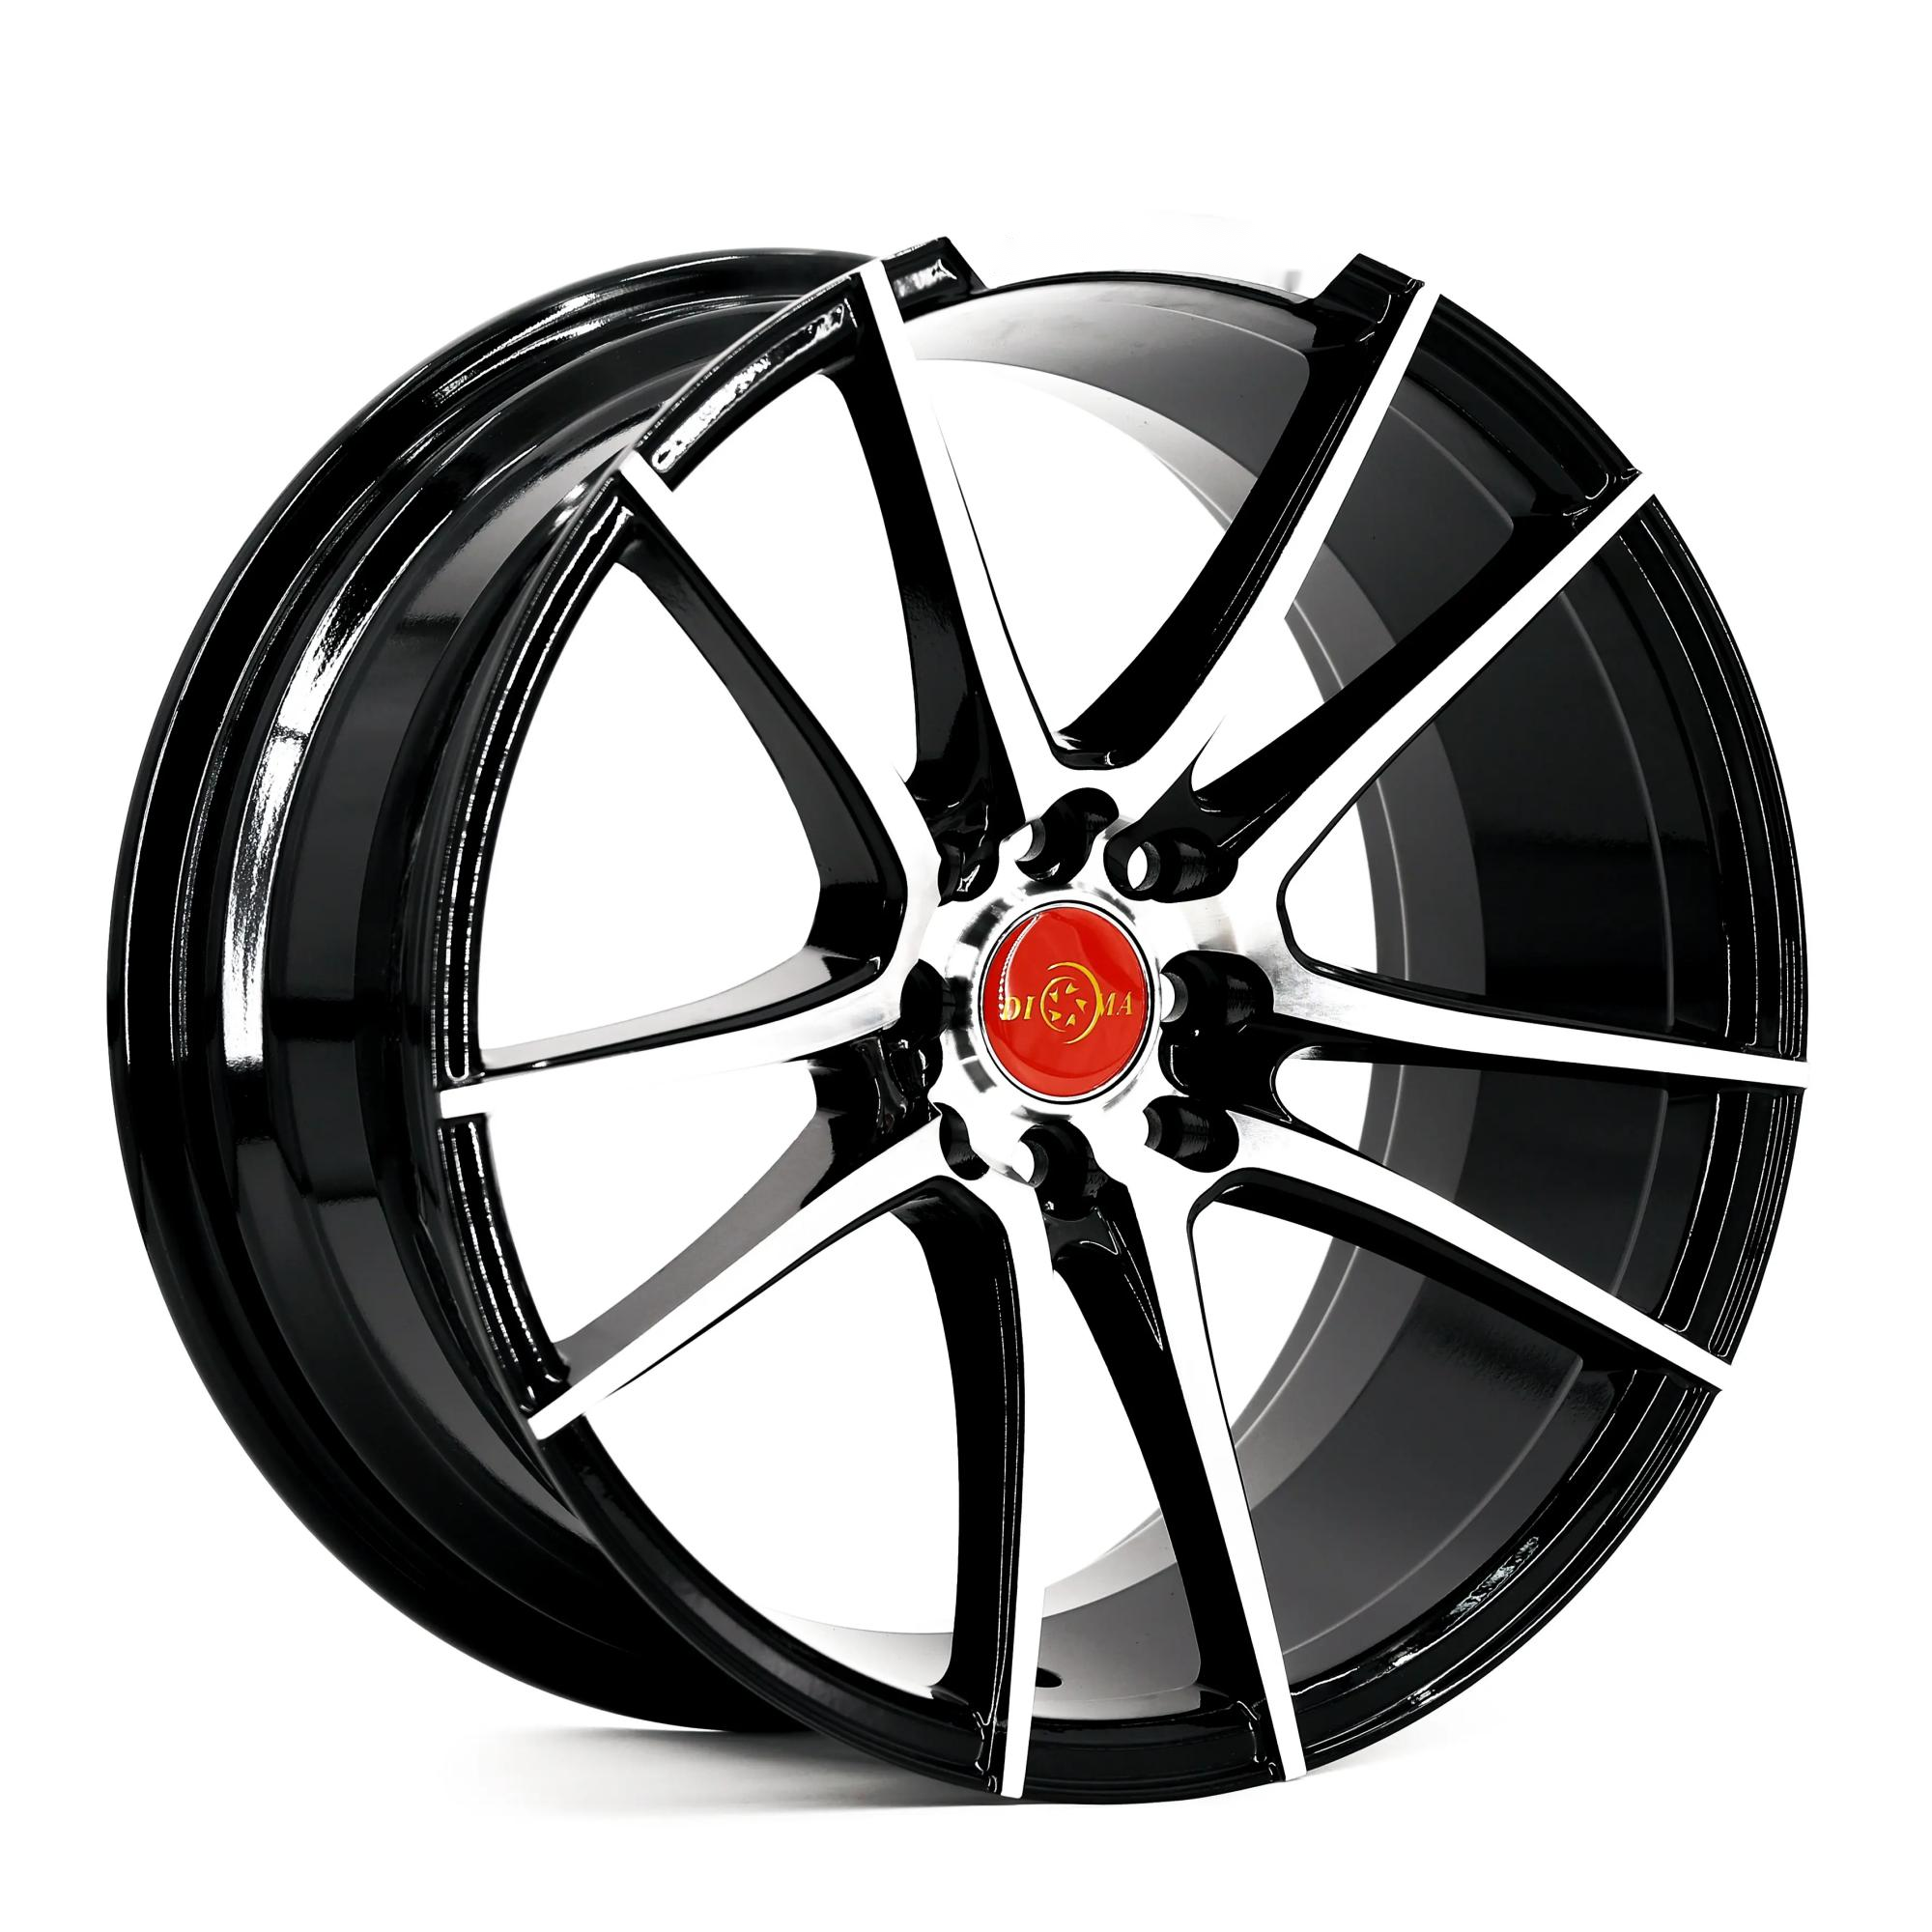 8 Year Exporter R17 Alloy Wheels - High Speed 15/17inch Casting Alloy Wheel Wholesale – Rayone